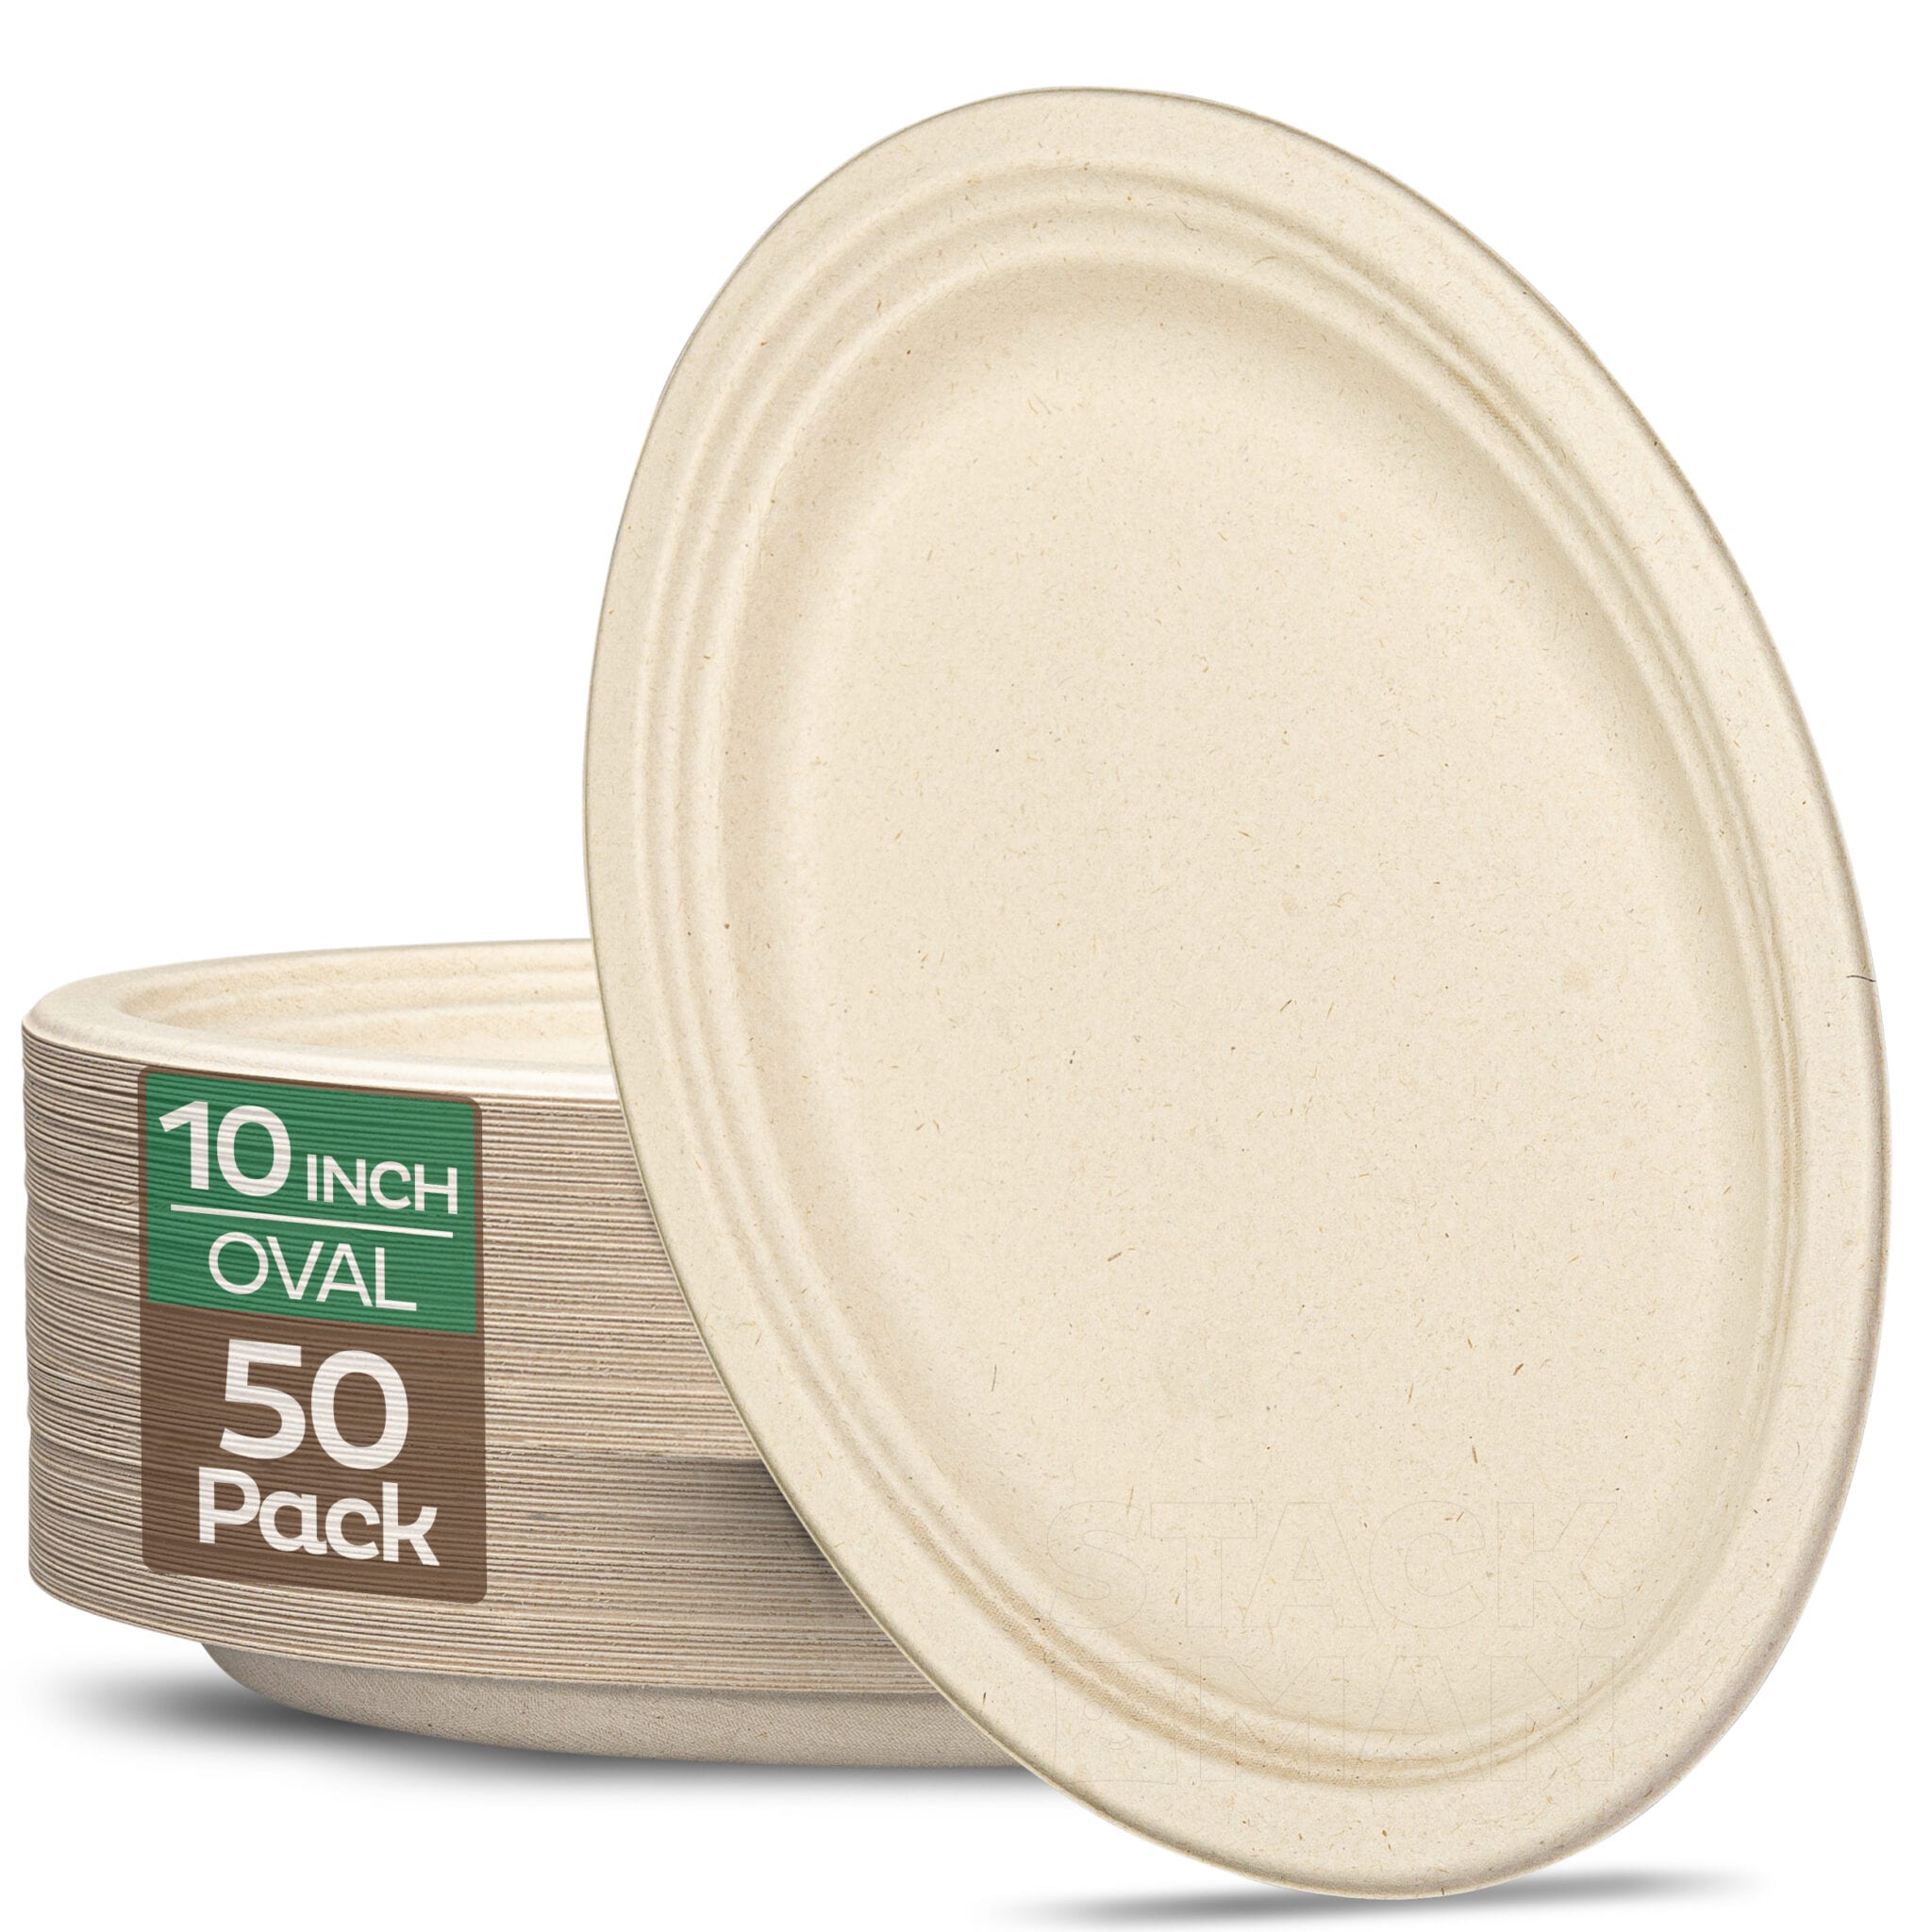 Compostable Plates Archives - A World Of Deals